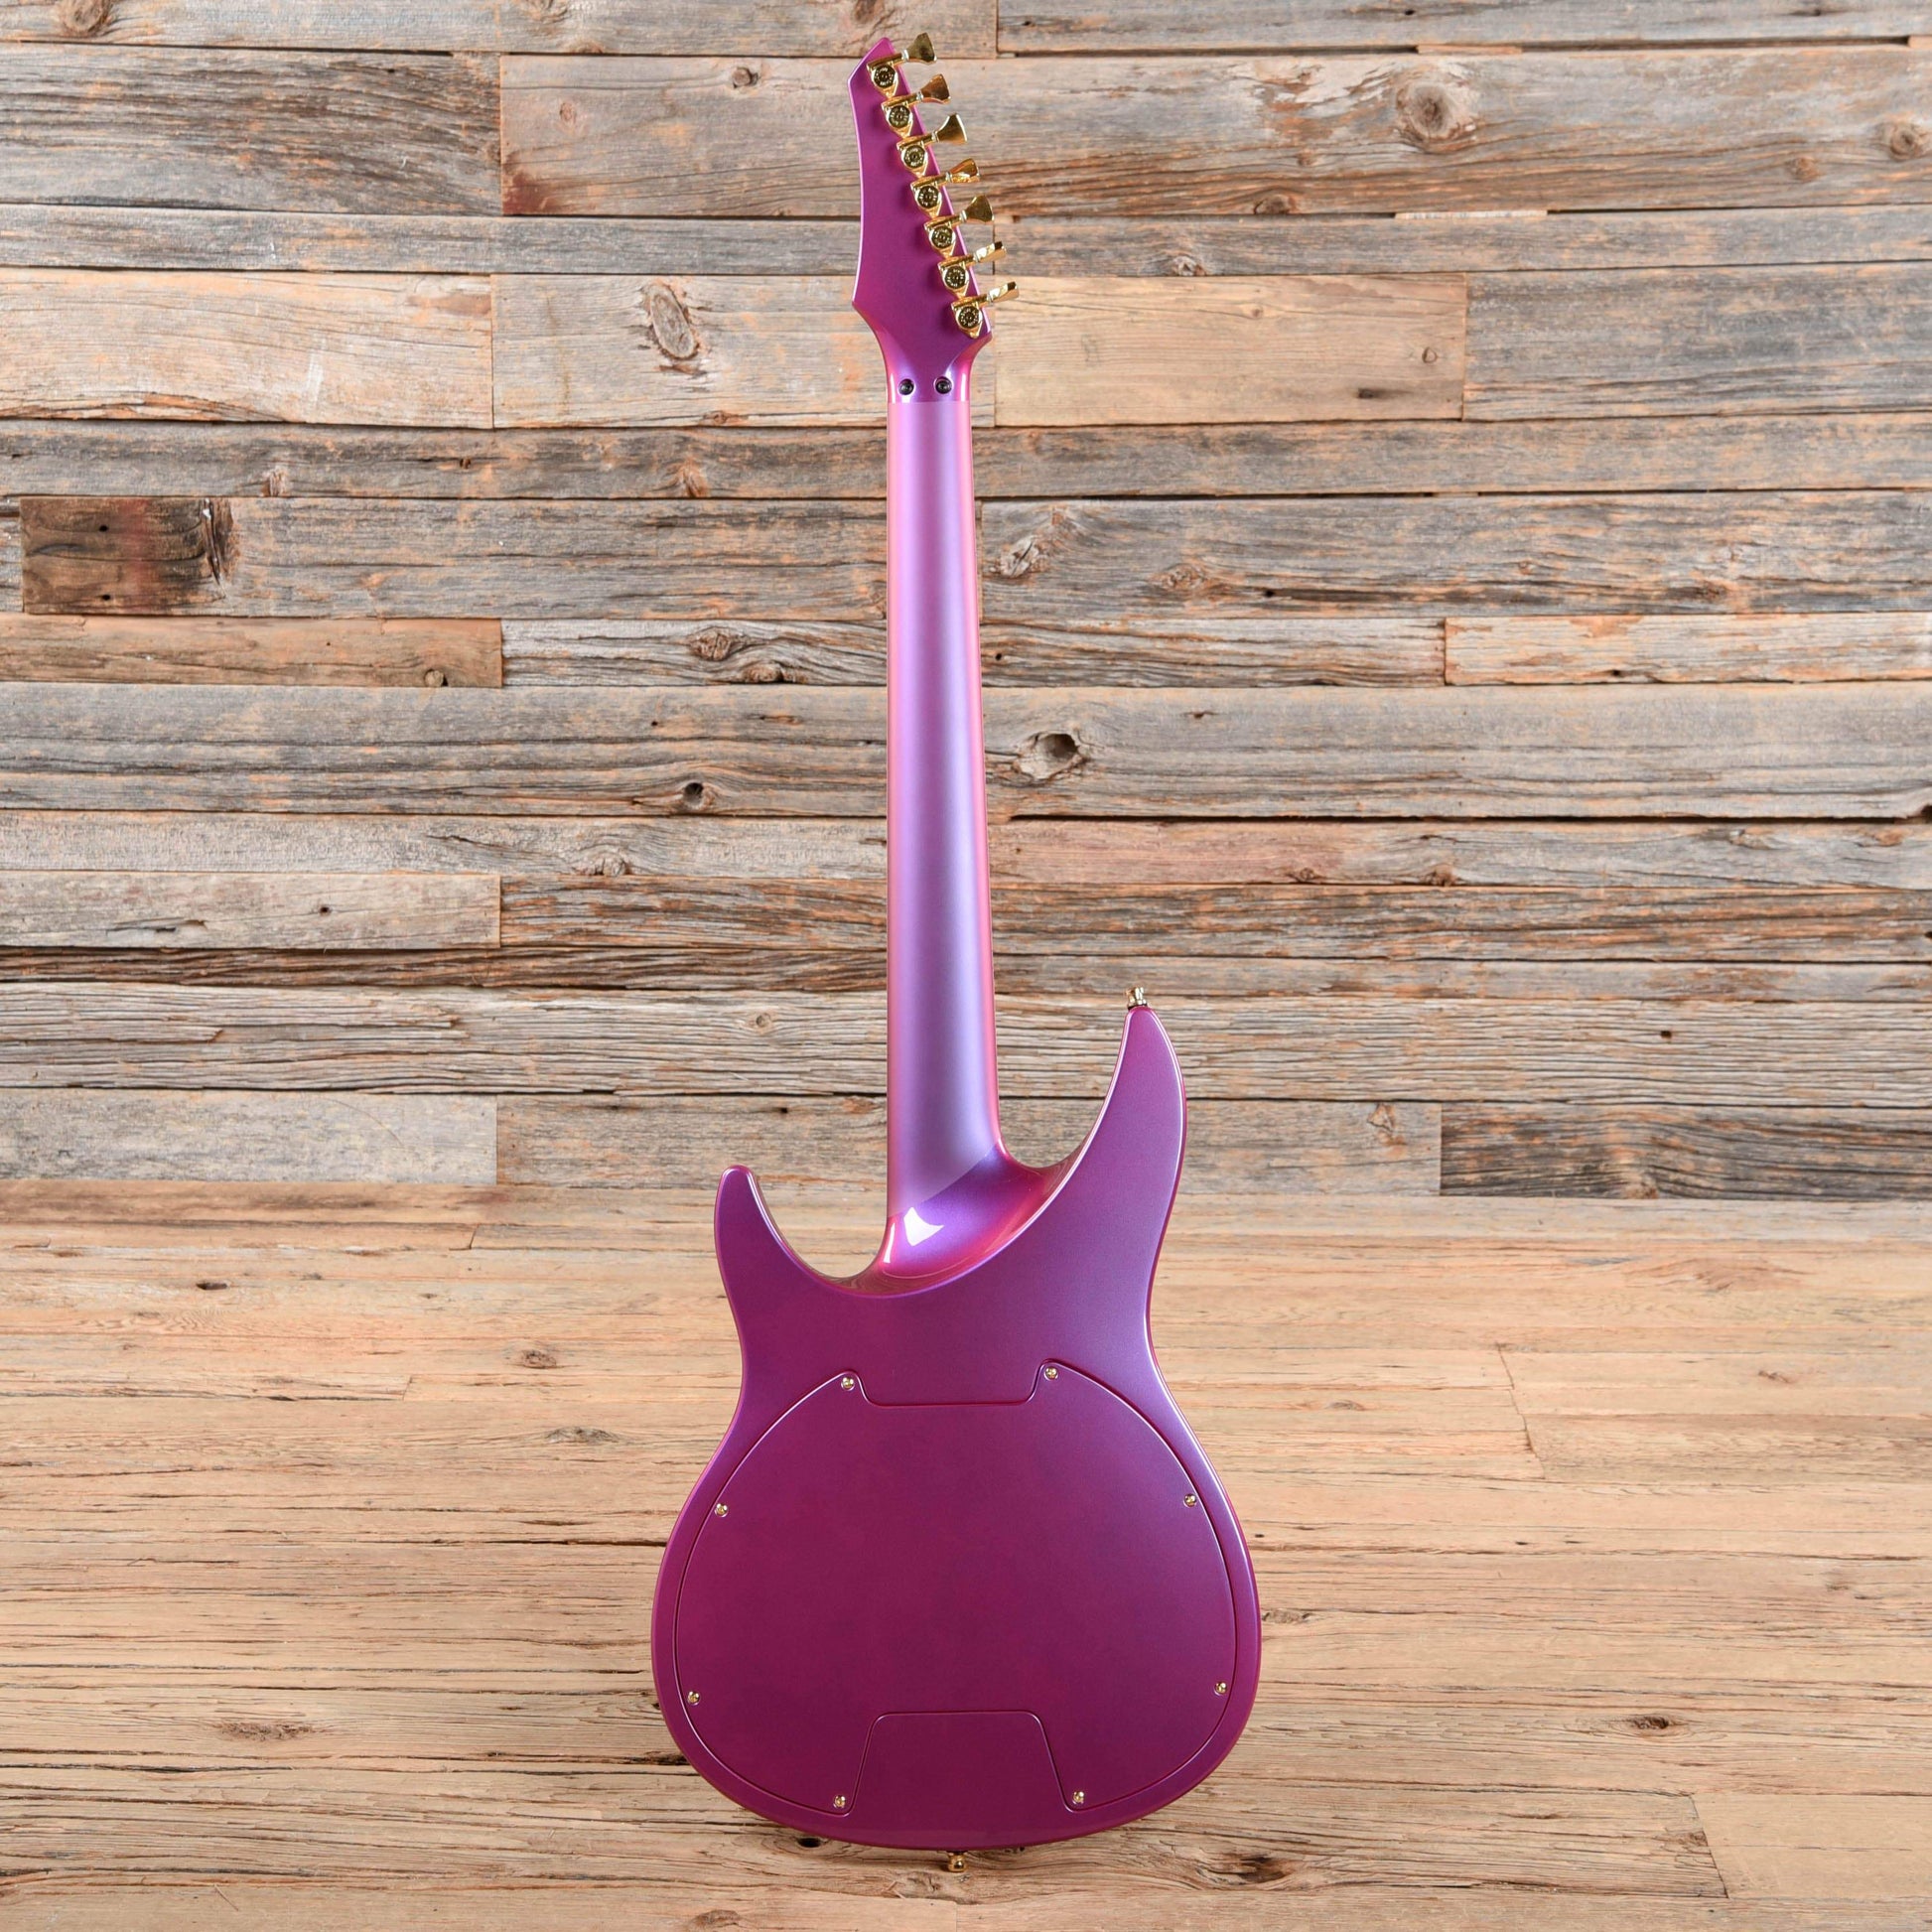 Aristides 070 Floyd Pink Electric Guitars / Solid Body